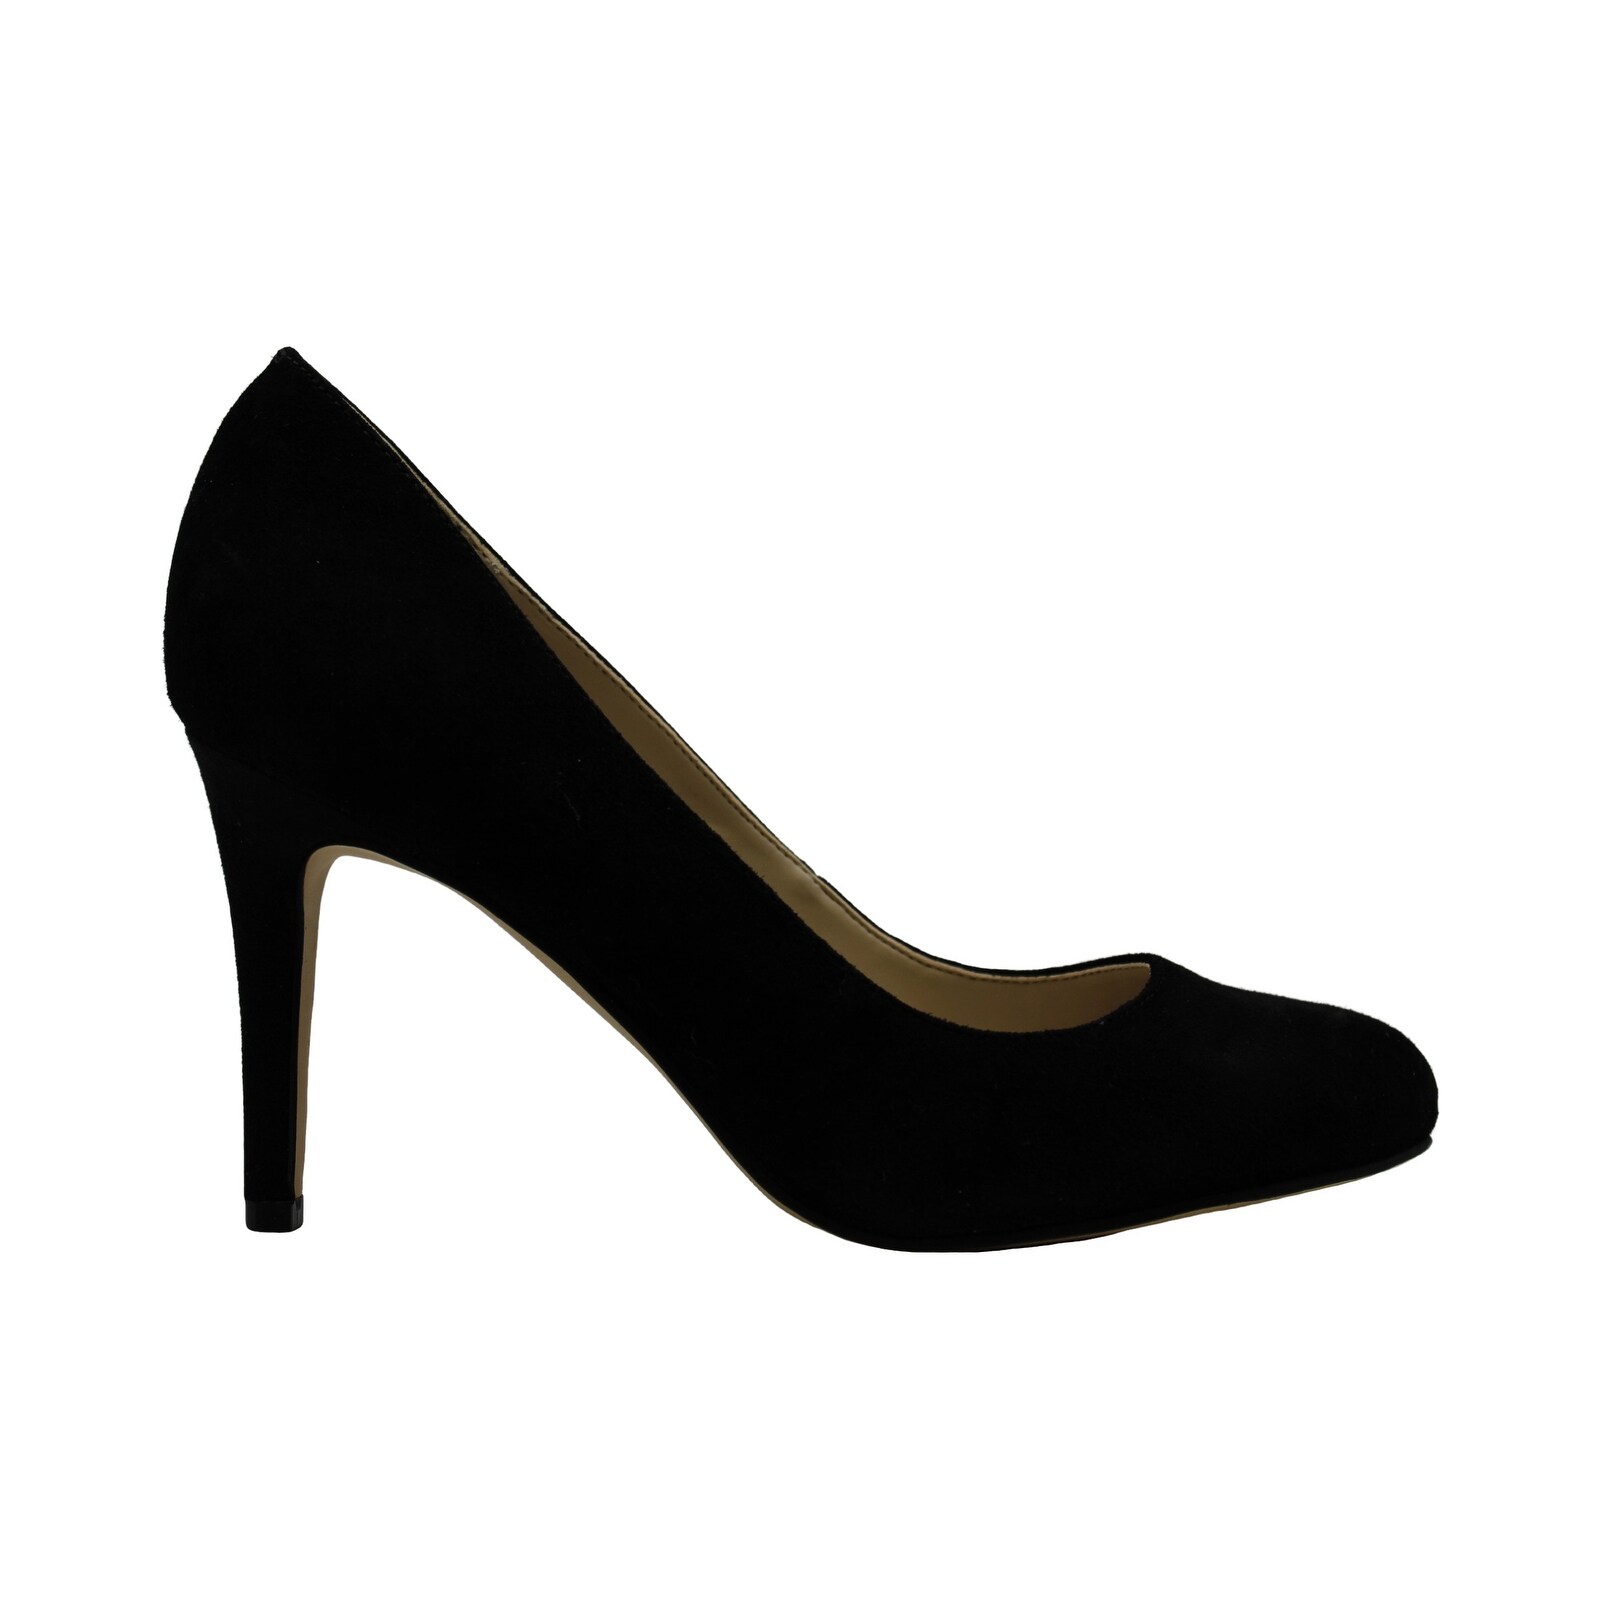 marc fisher white pumps